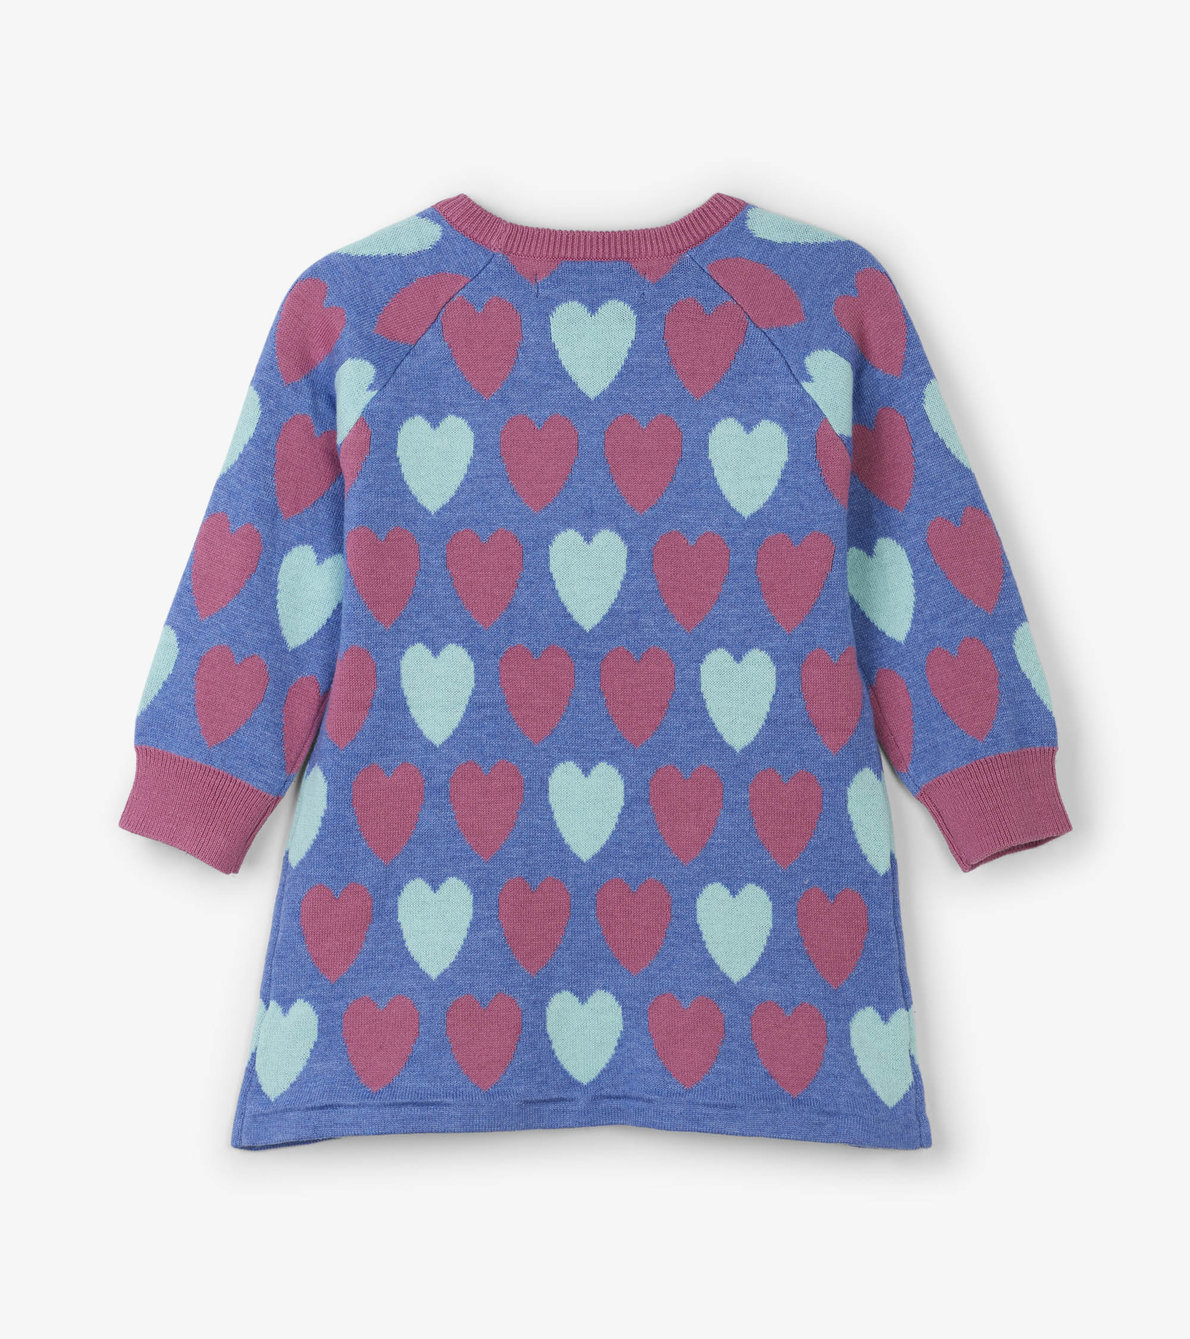 View larger image of Pretty Hearts Baby Sweater Dress